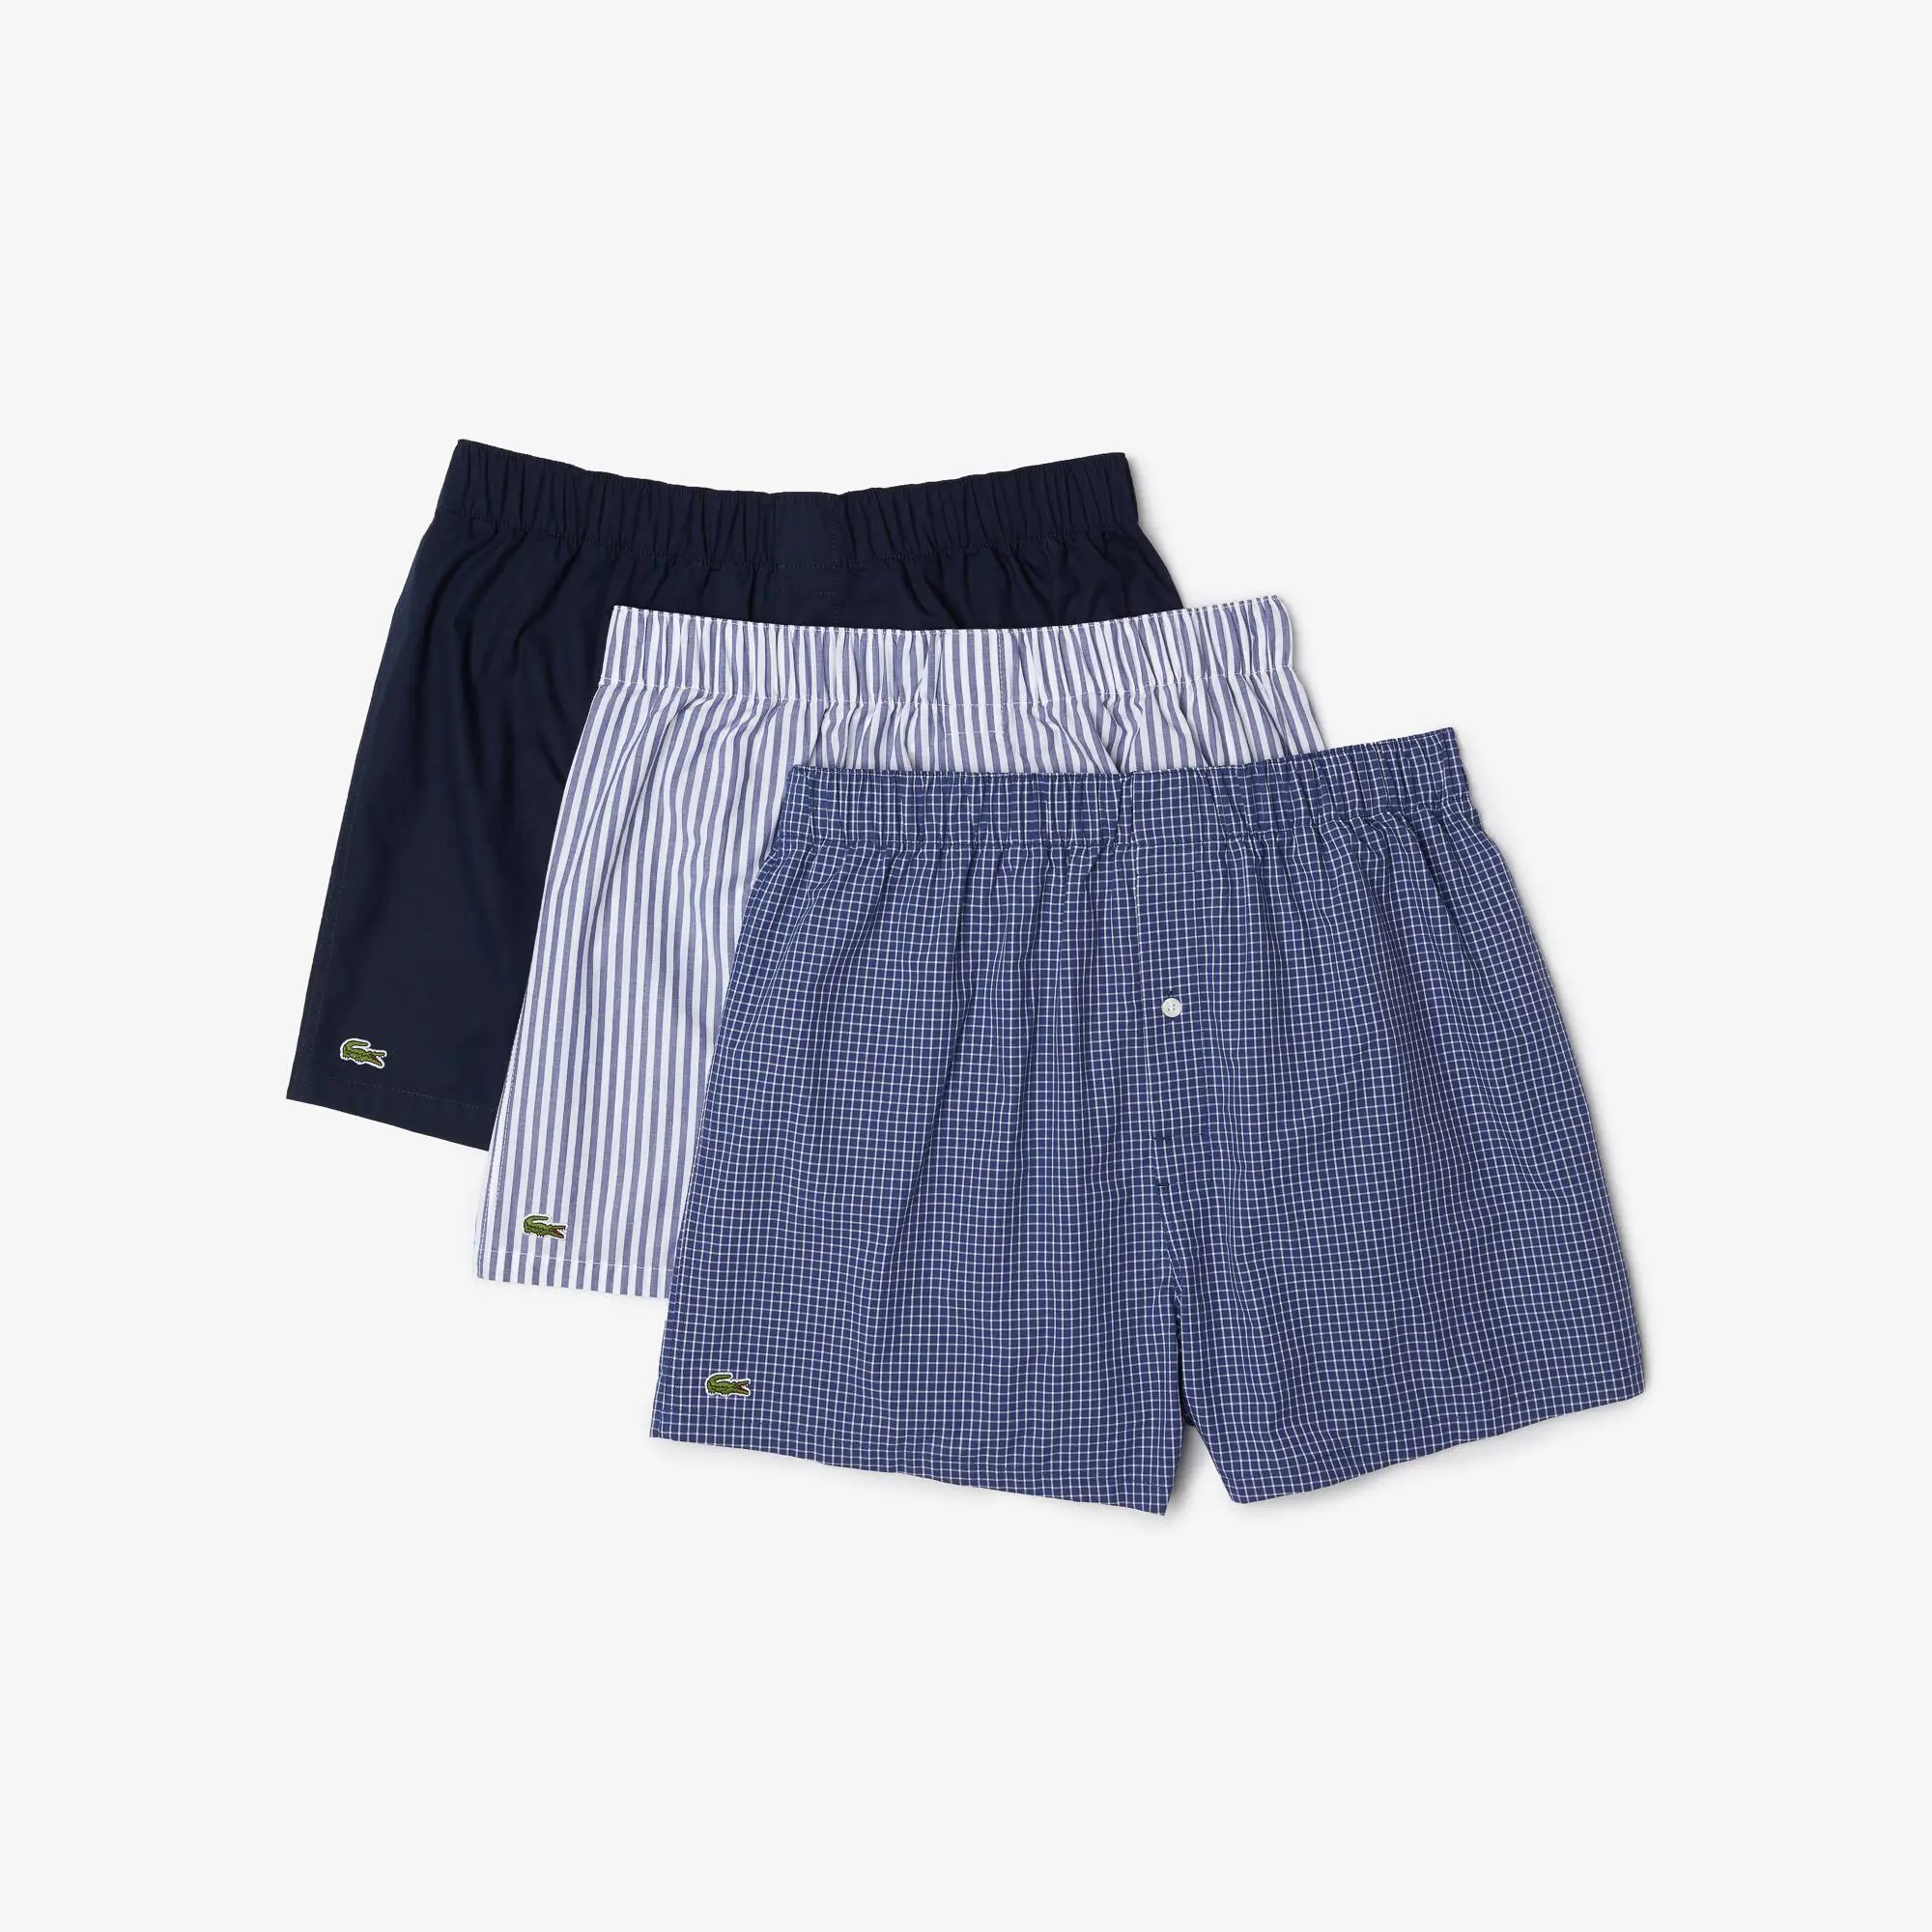 Lacoste Pack Of 3 Authentics Striped Boxers. 2